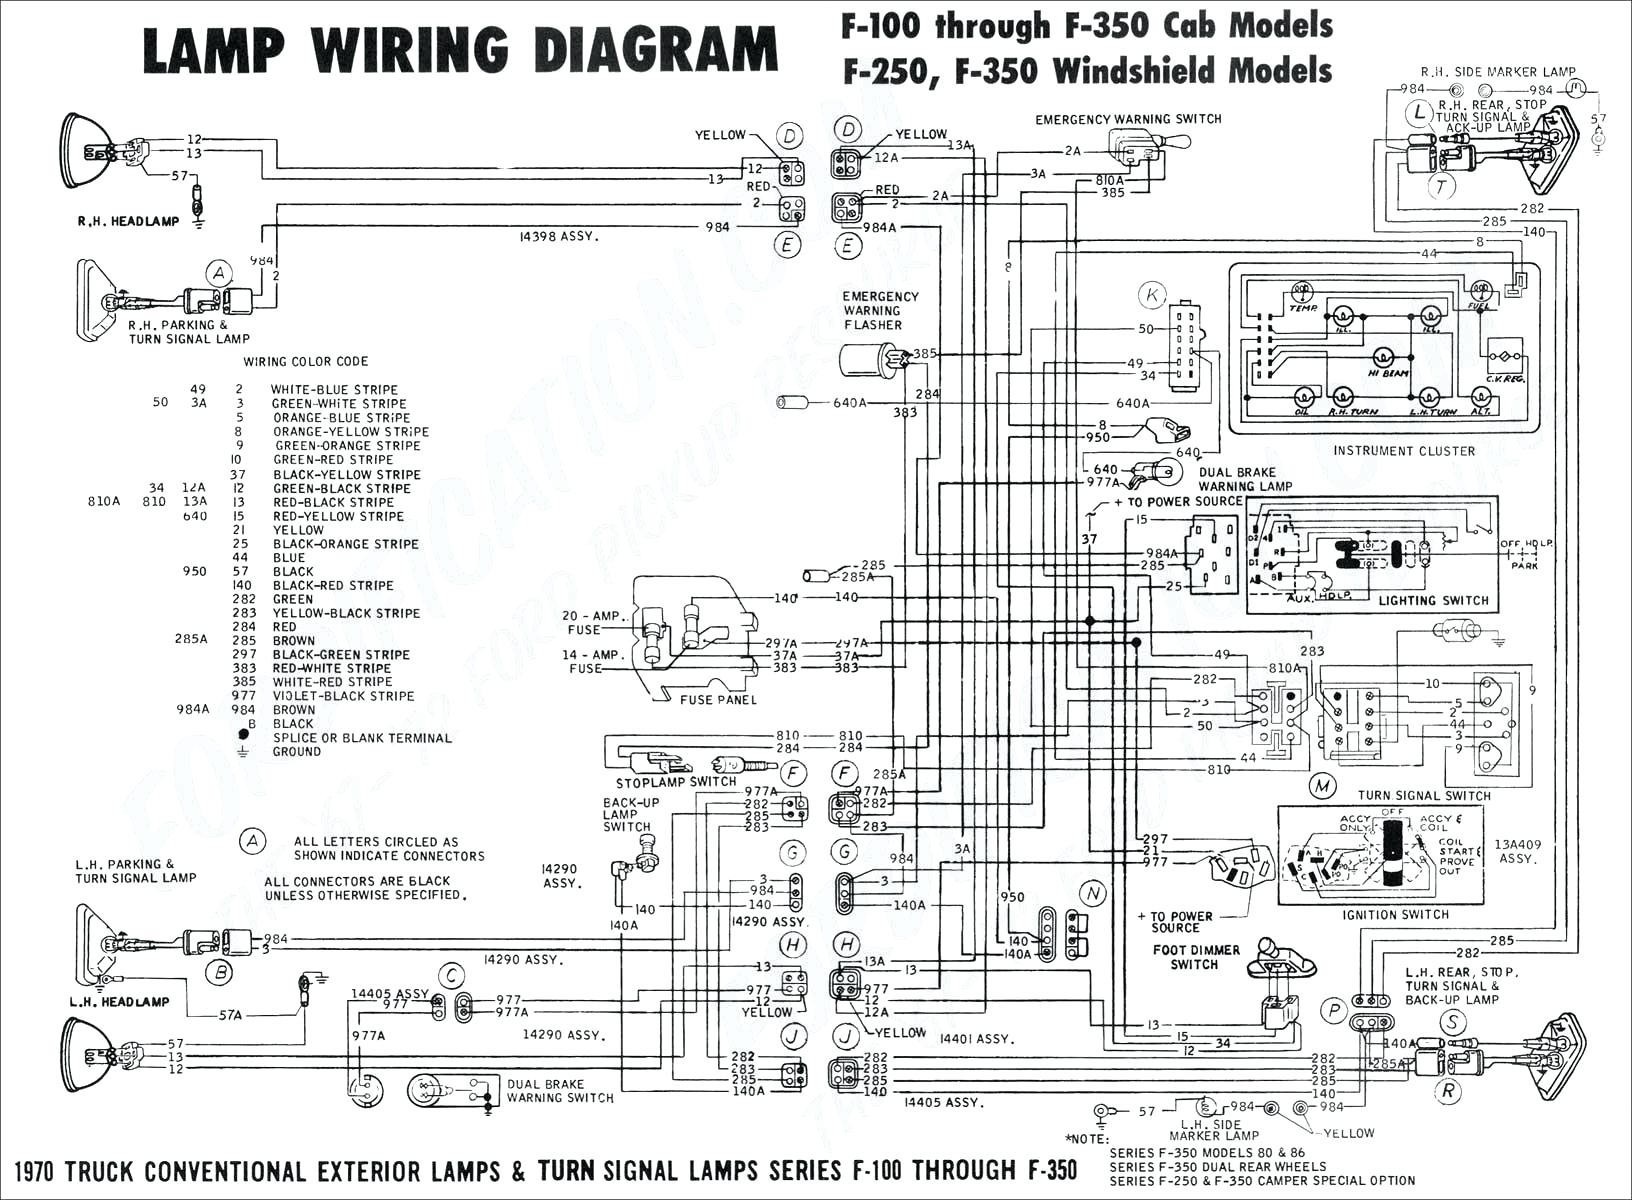 Wiring Diagrams for Turn Signal Best Stop Turn Tail Light Wiring Ford F150 Wiring Diagrams